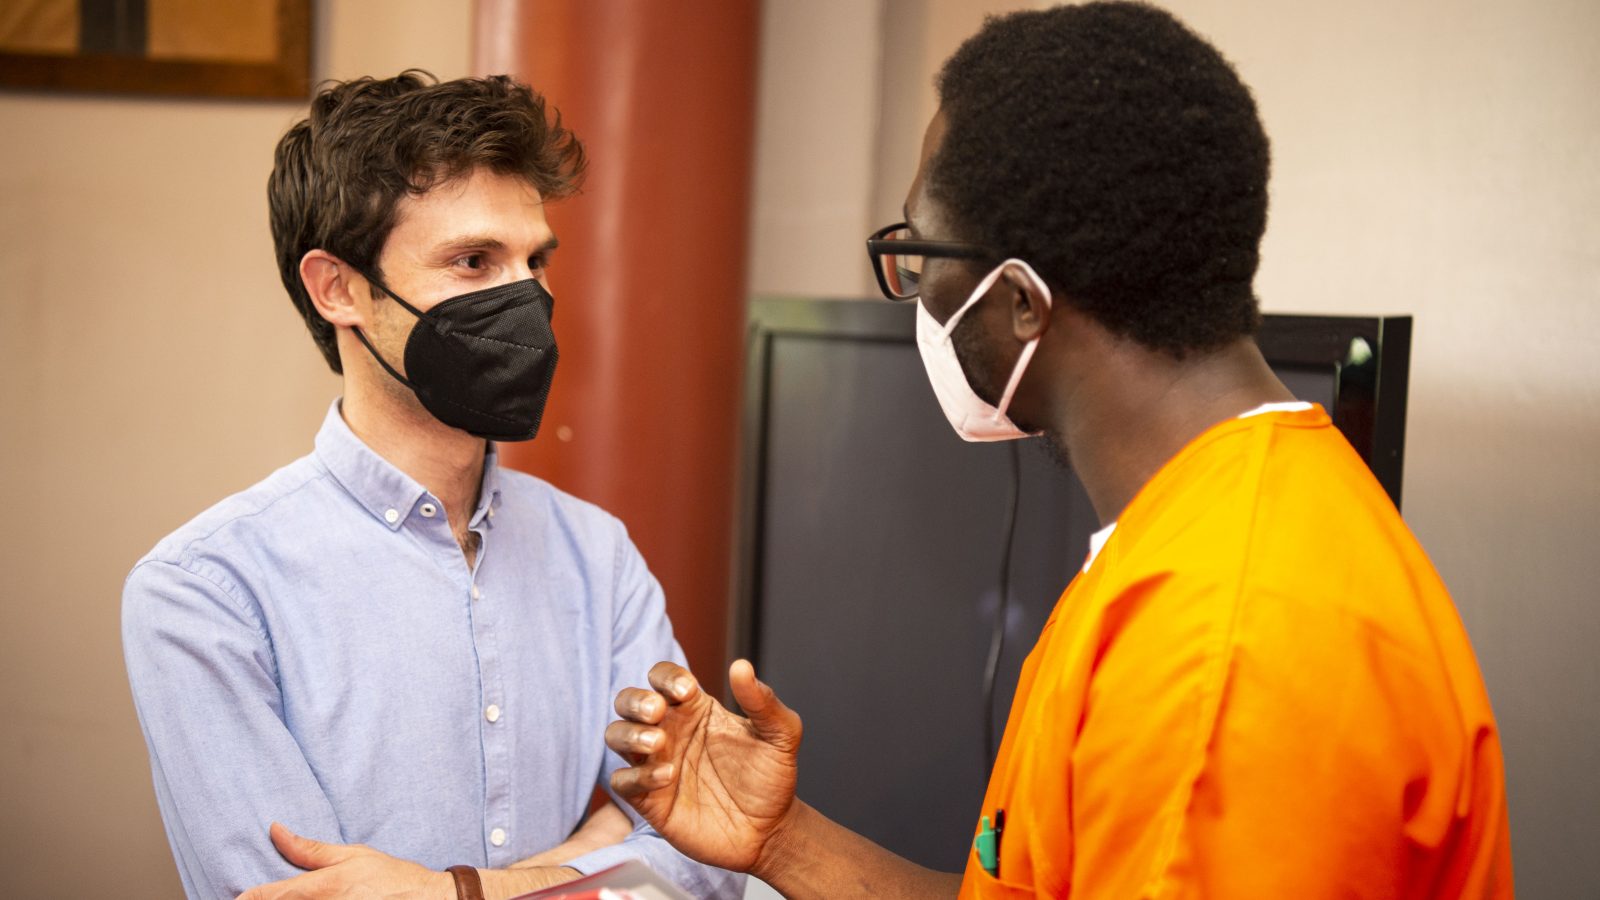 Omar Alshogre (left) wears a mask and a blue button down and talks with a scholar in Georgetown's Prison Scholars Program who wears an orange jumpsuit and a mask.